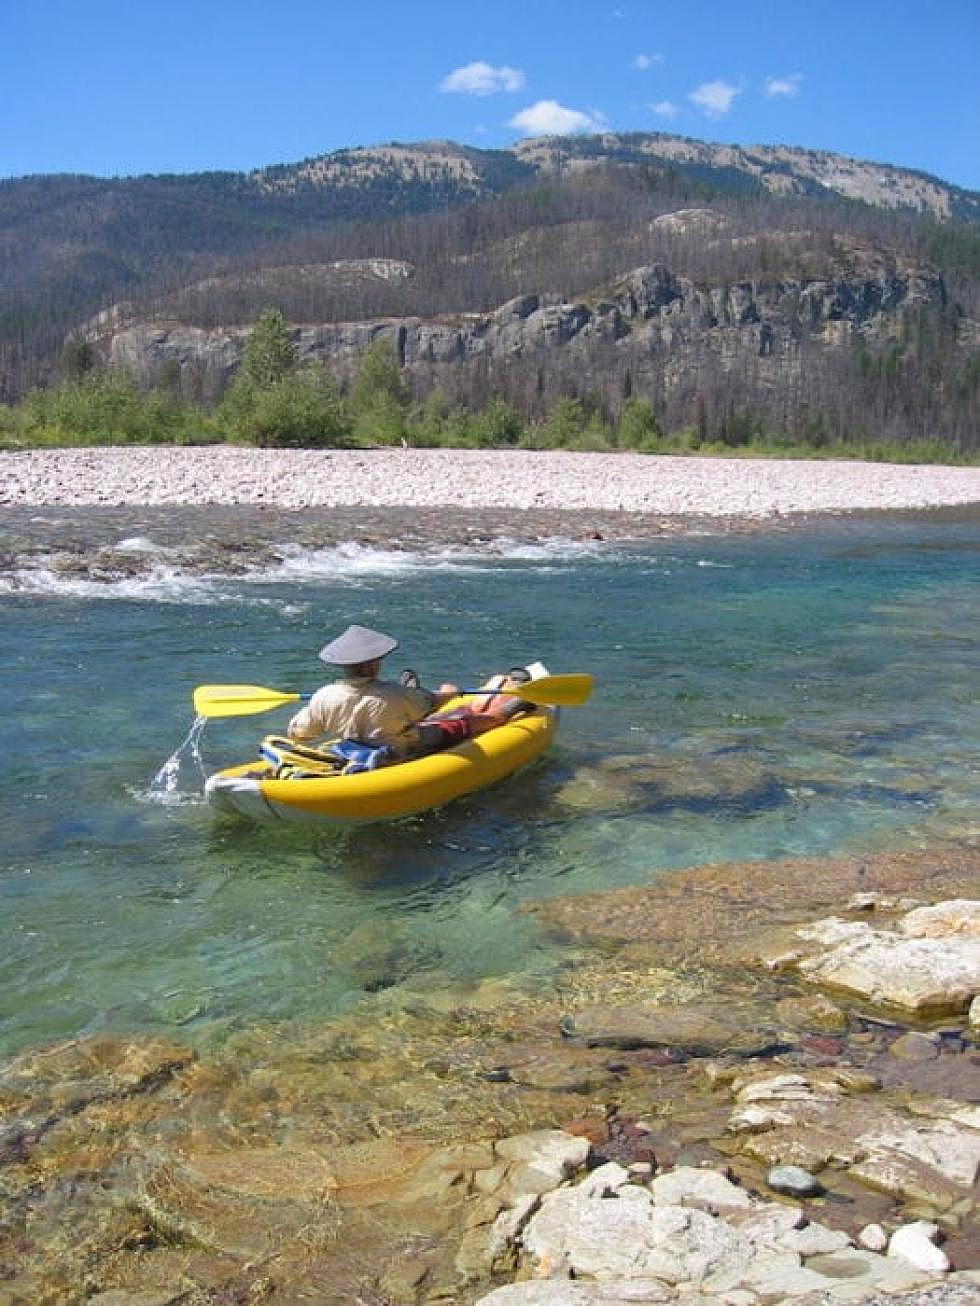 Booming use prompts rewrite of Flathead River management plan